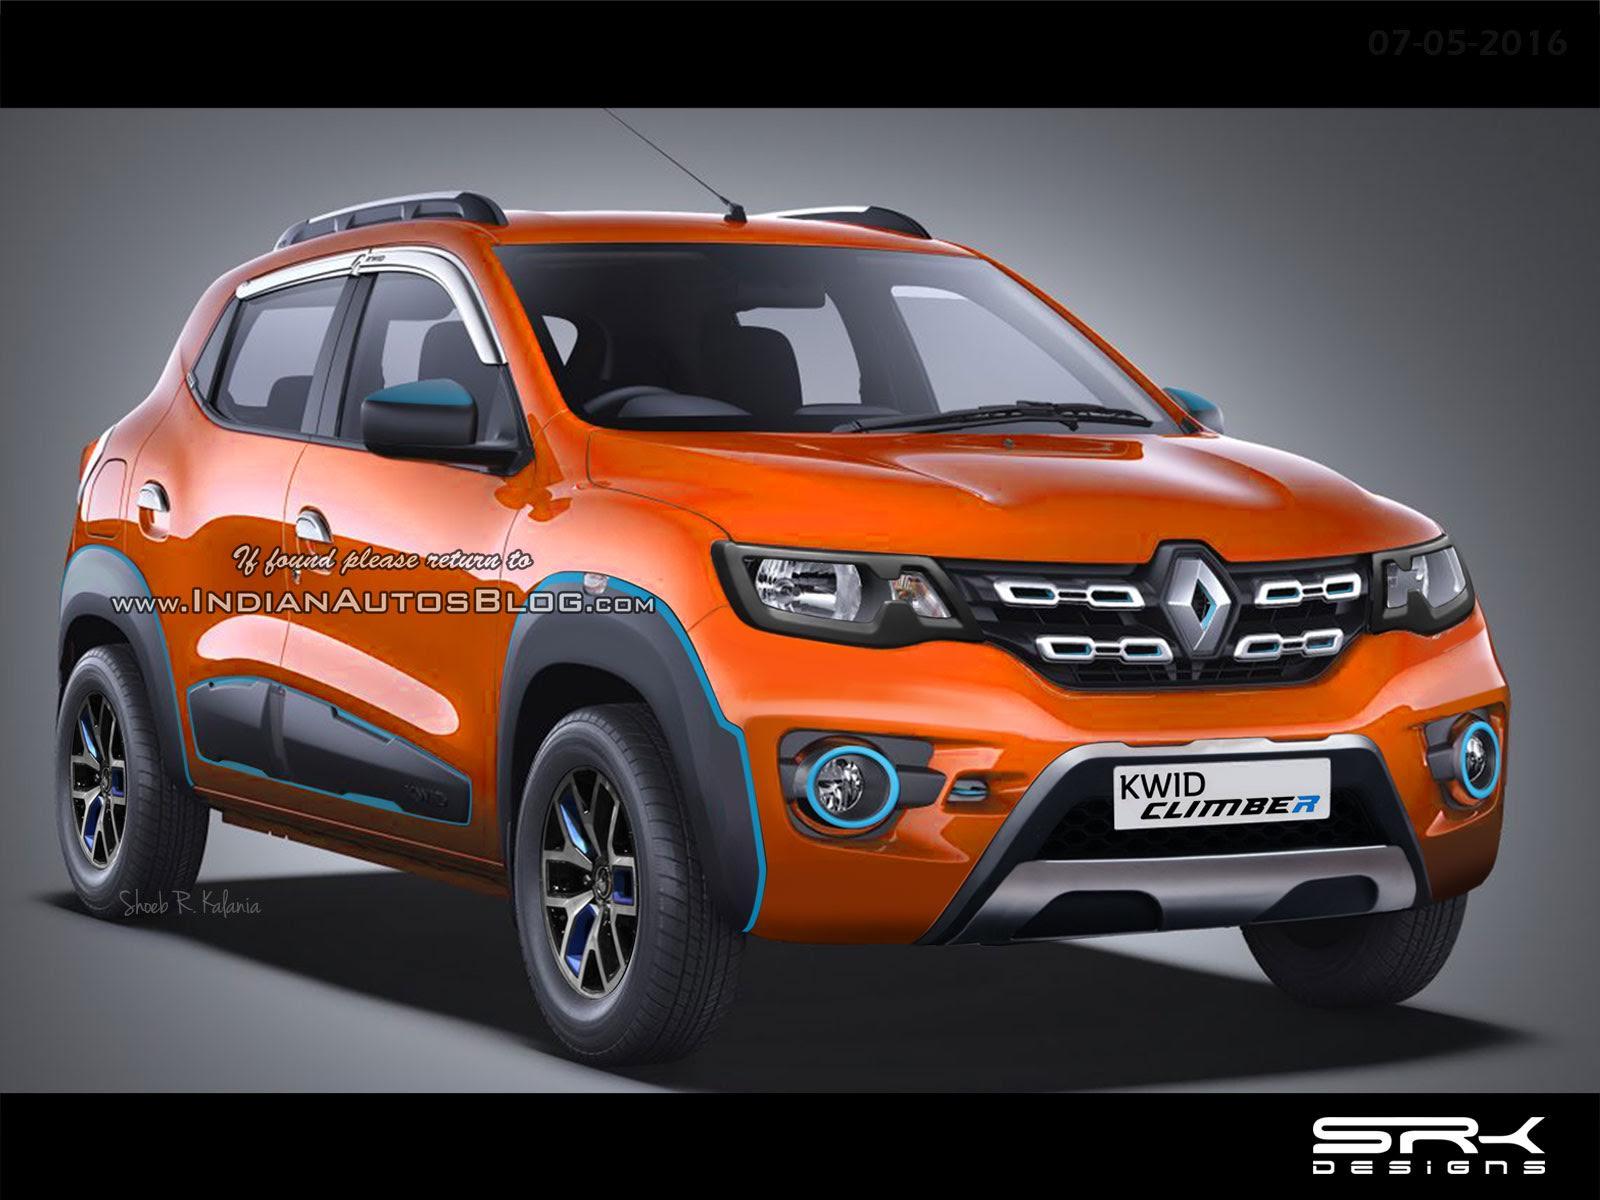 Production of Renault Kwid suspended due to engine problems